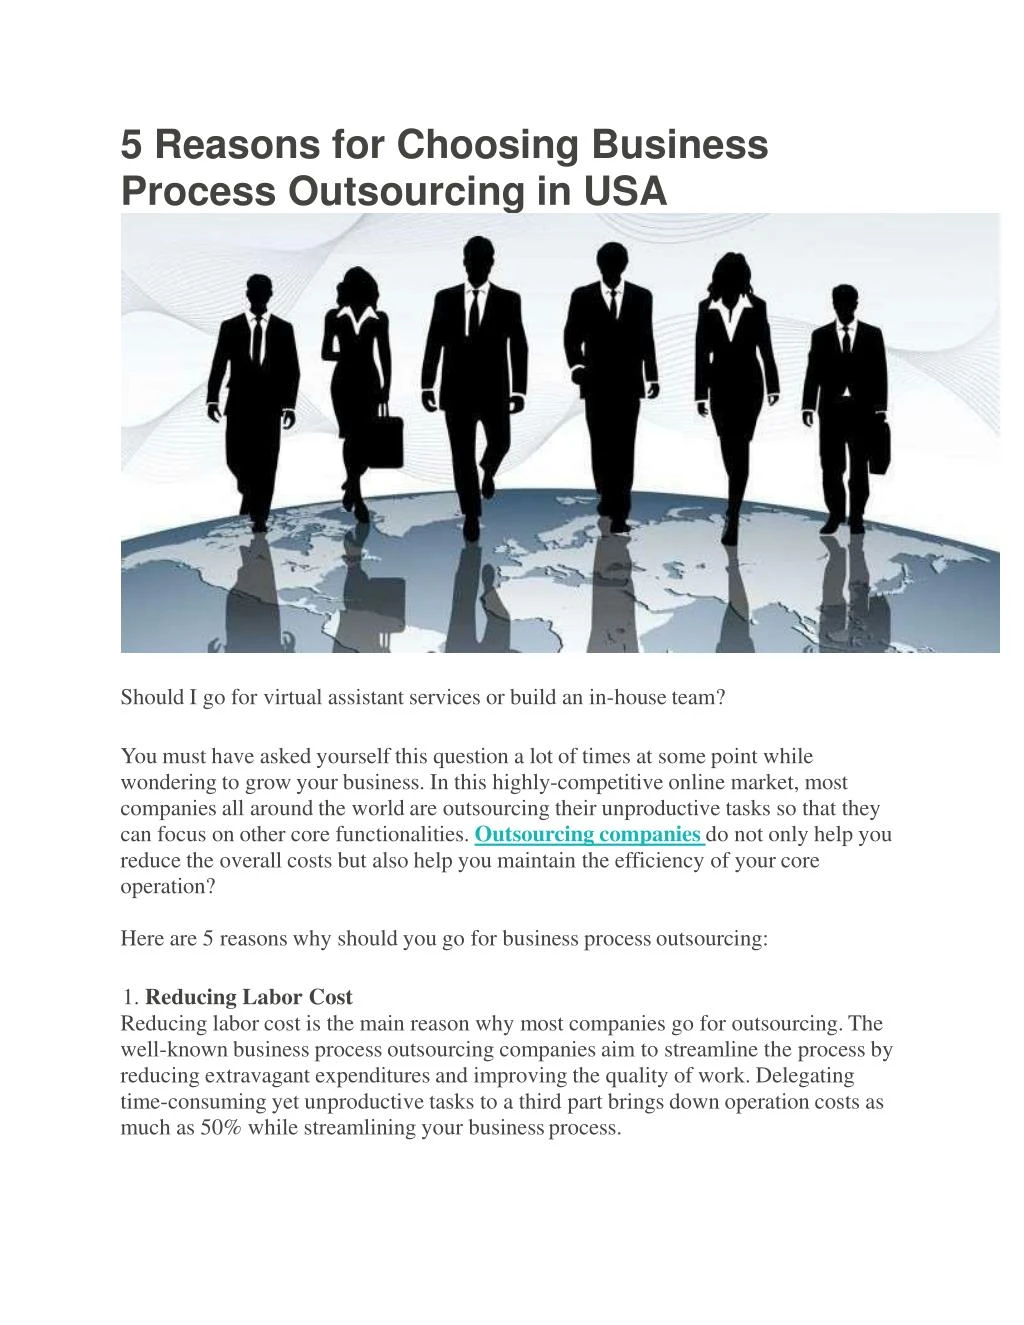 5 reasons for choosing business process outsourcing in usa